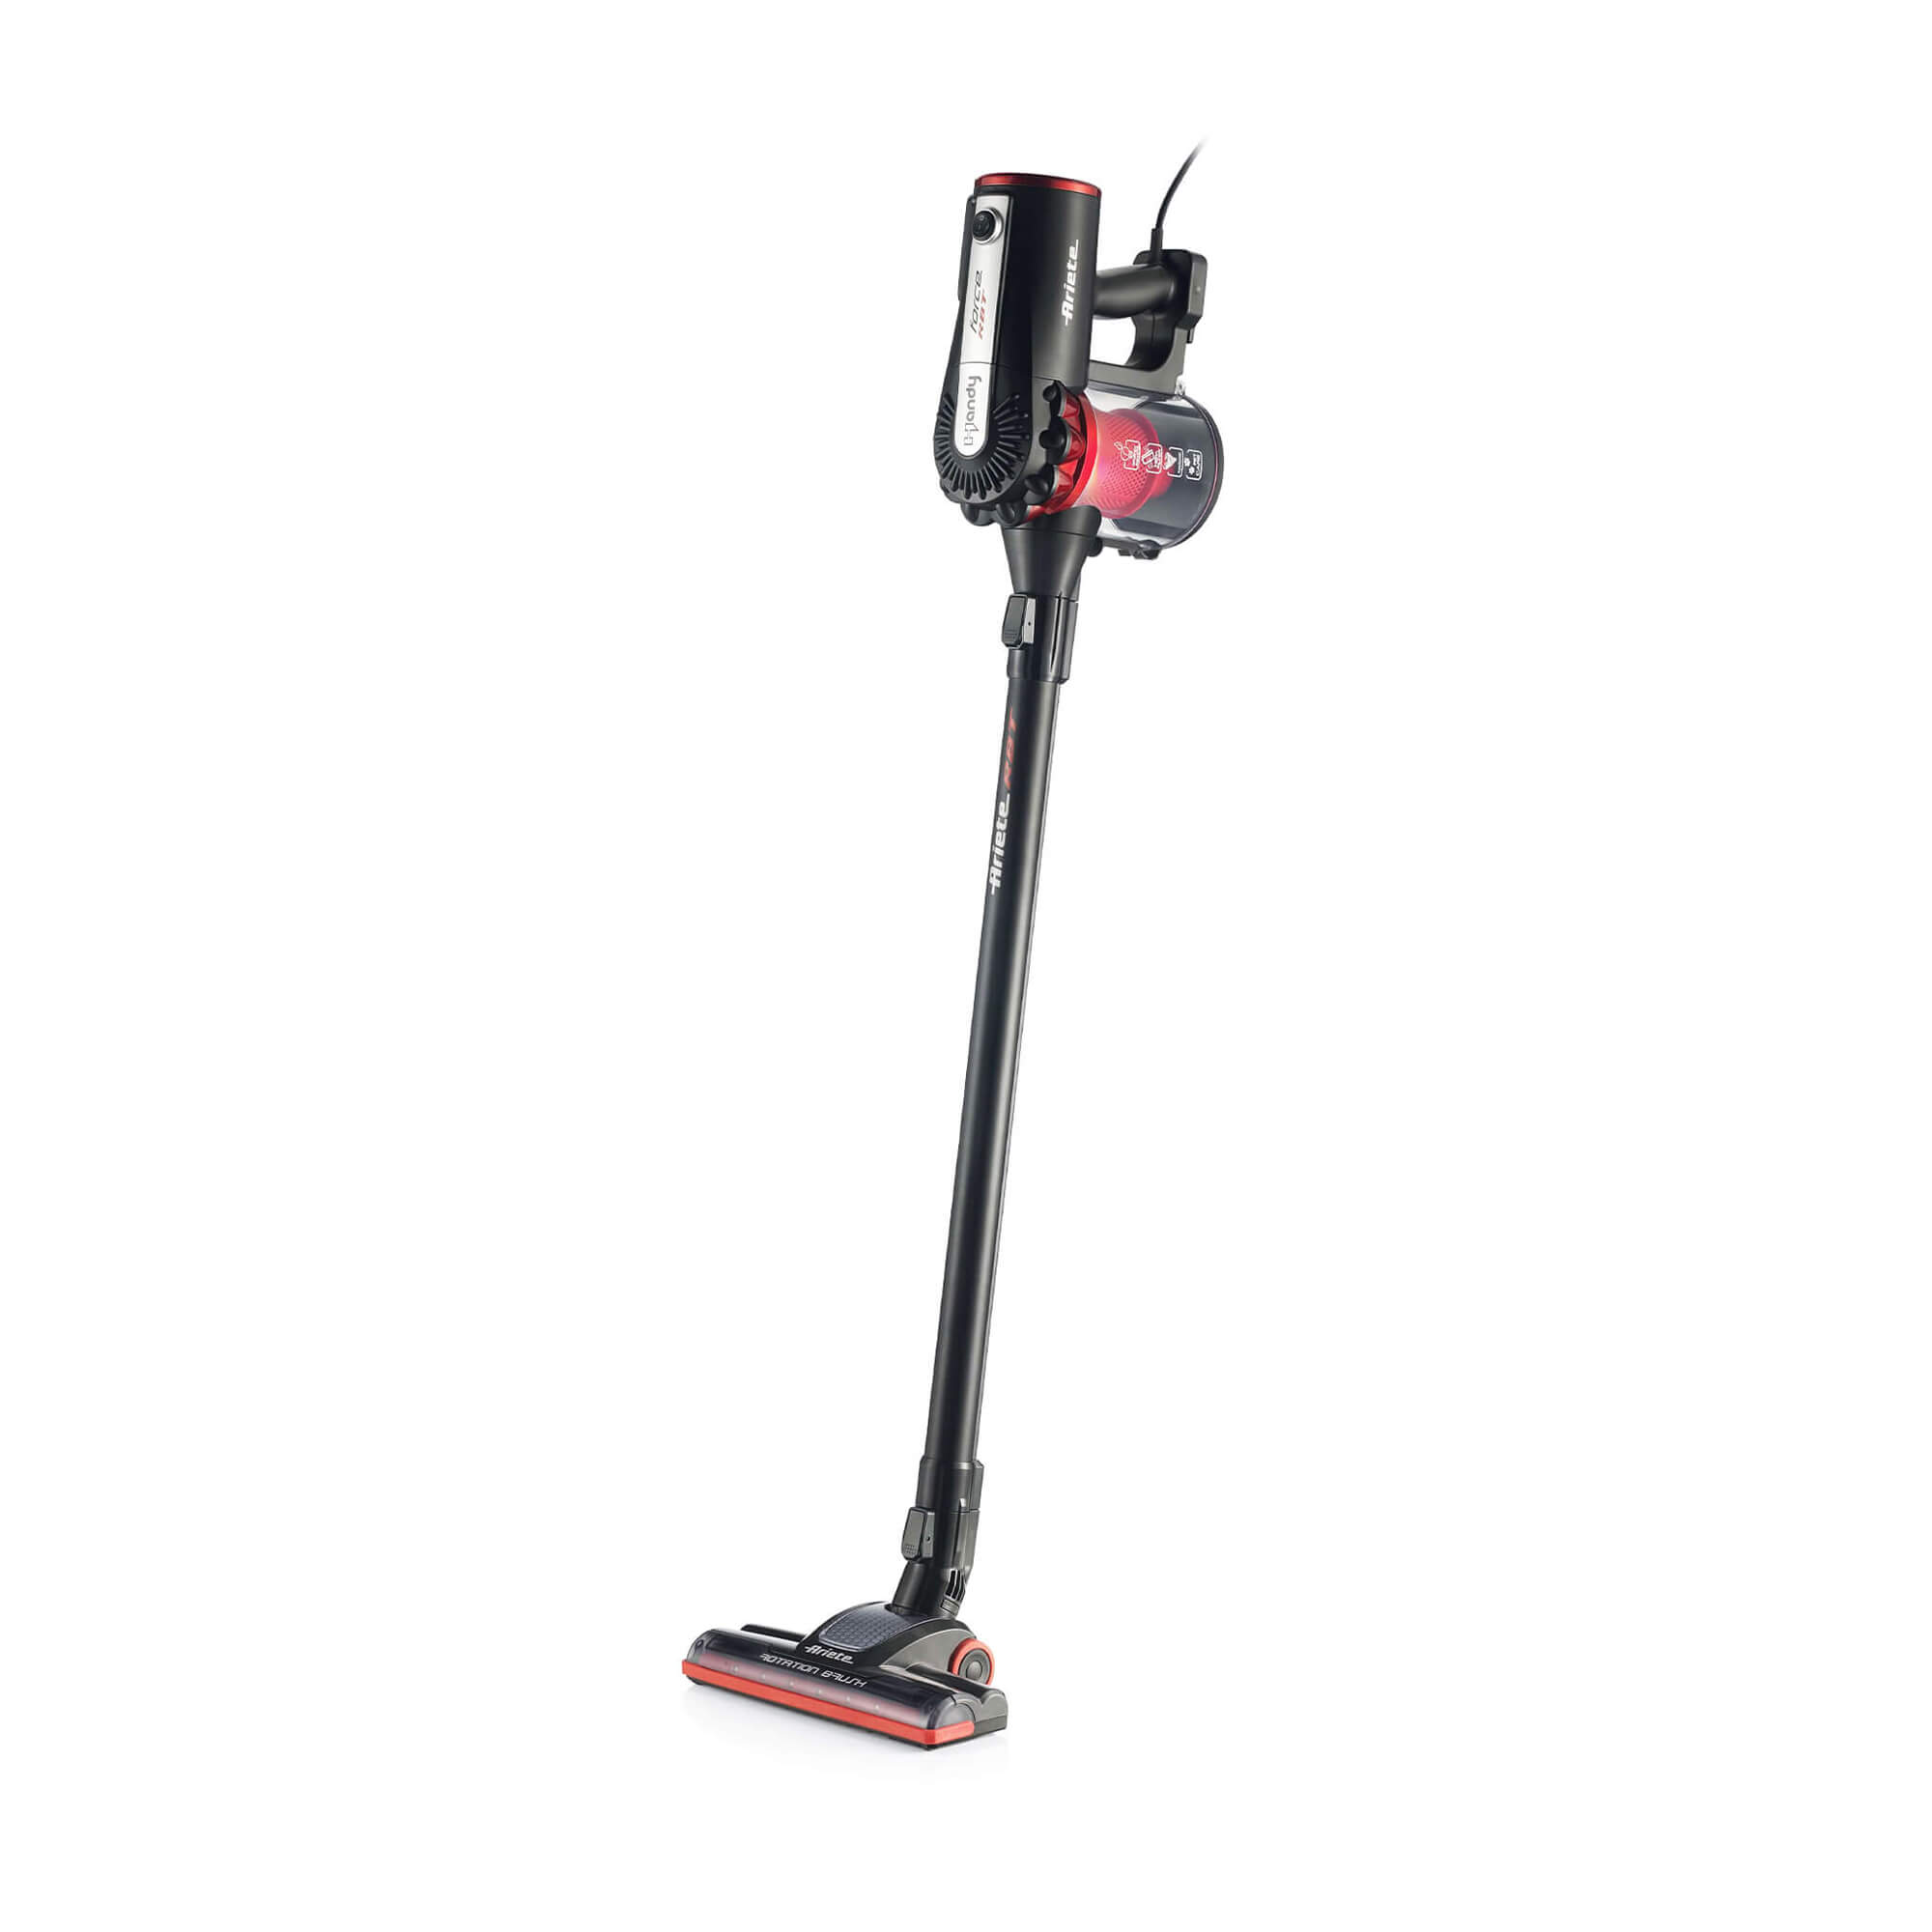 Ariete 2761 Handy Force review